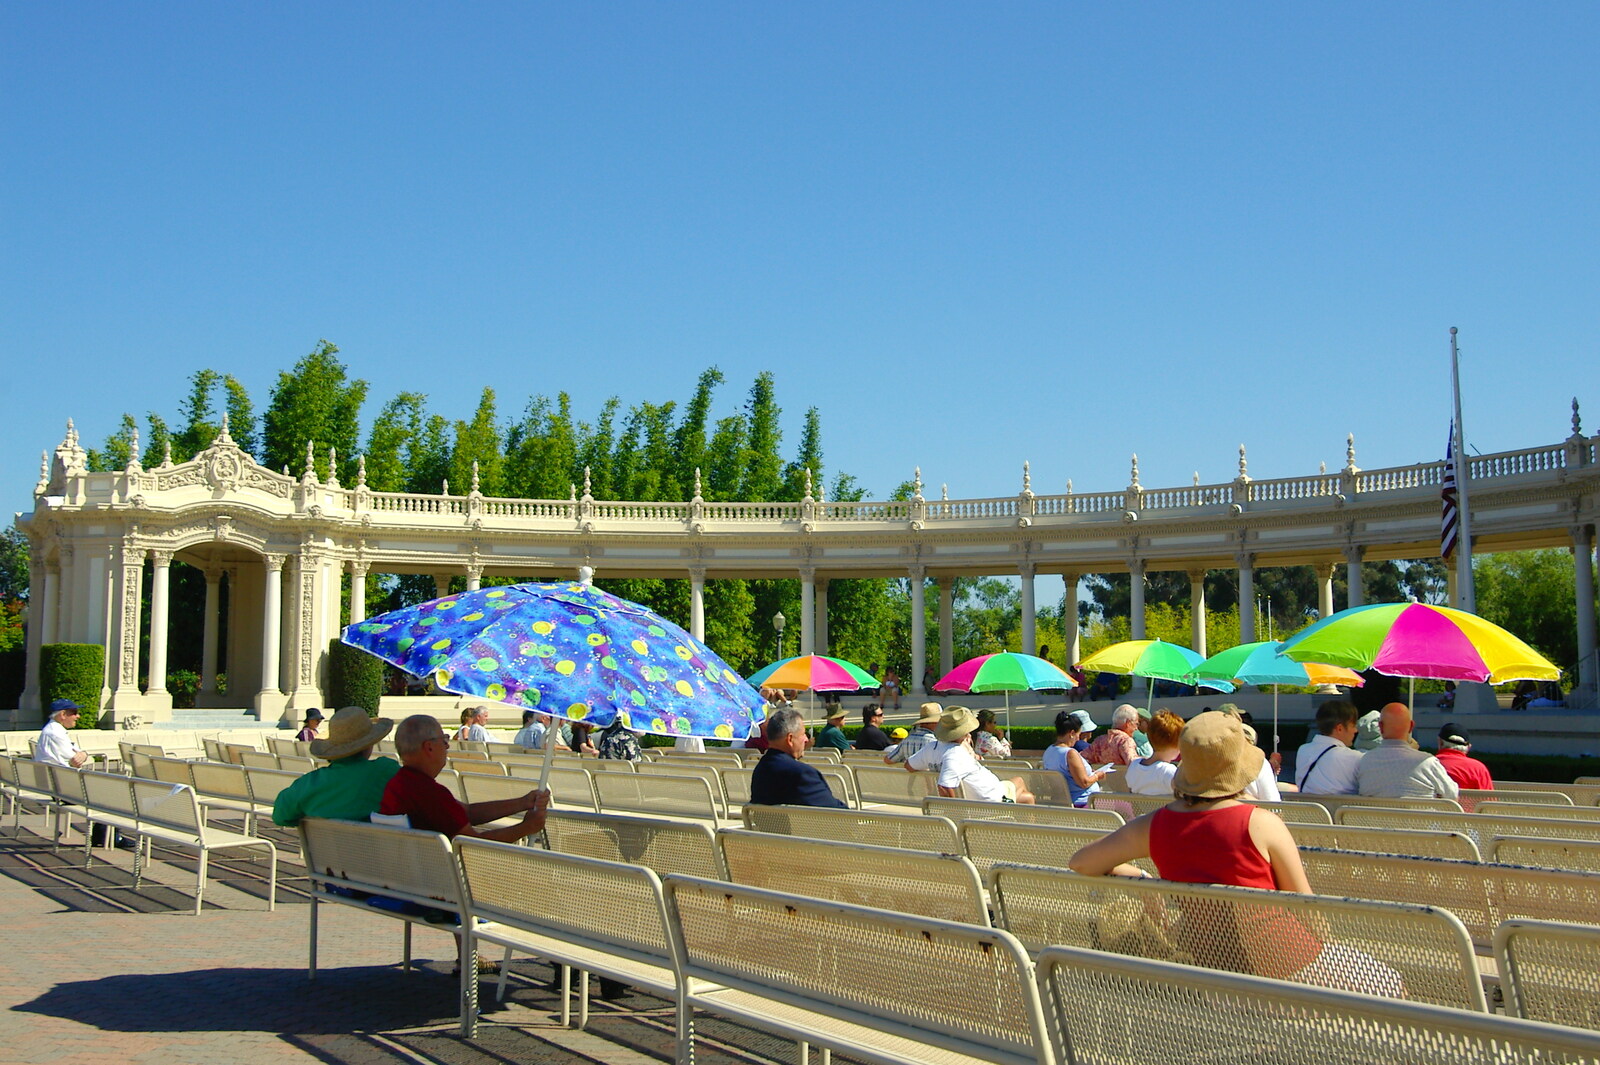 Scenes and People of Balboa Park, San Diego, California - 25th September 2005: Crowds under umbrellas